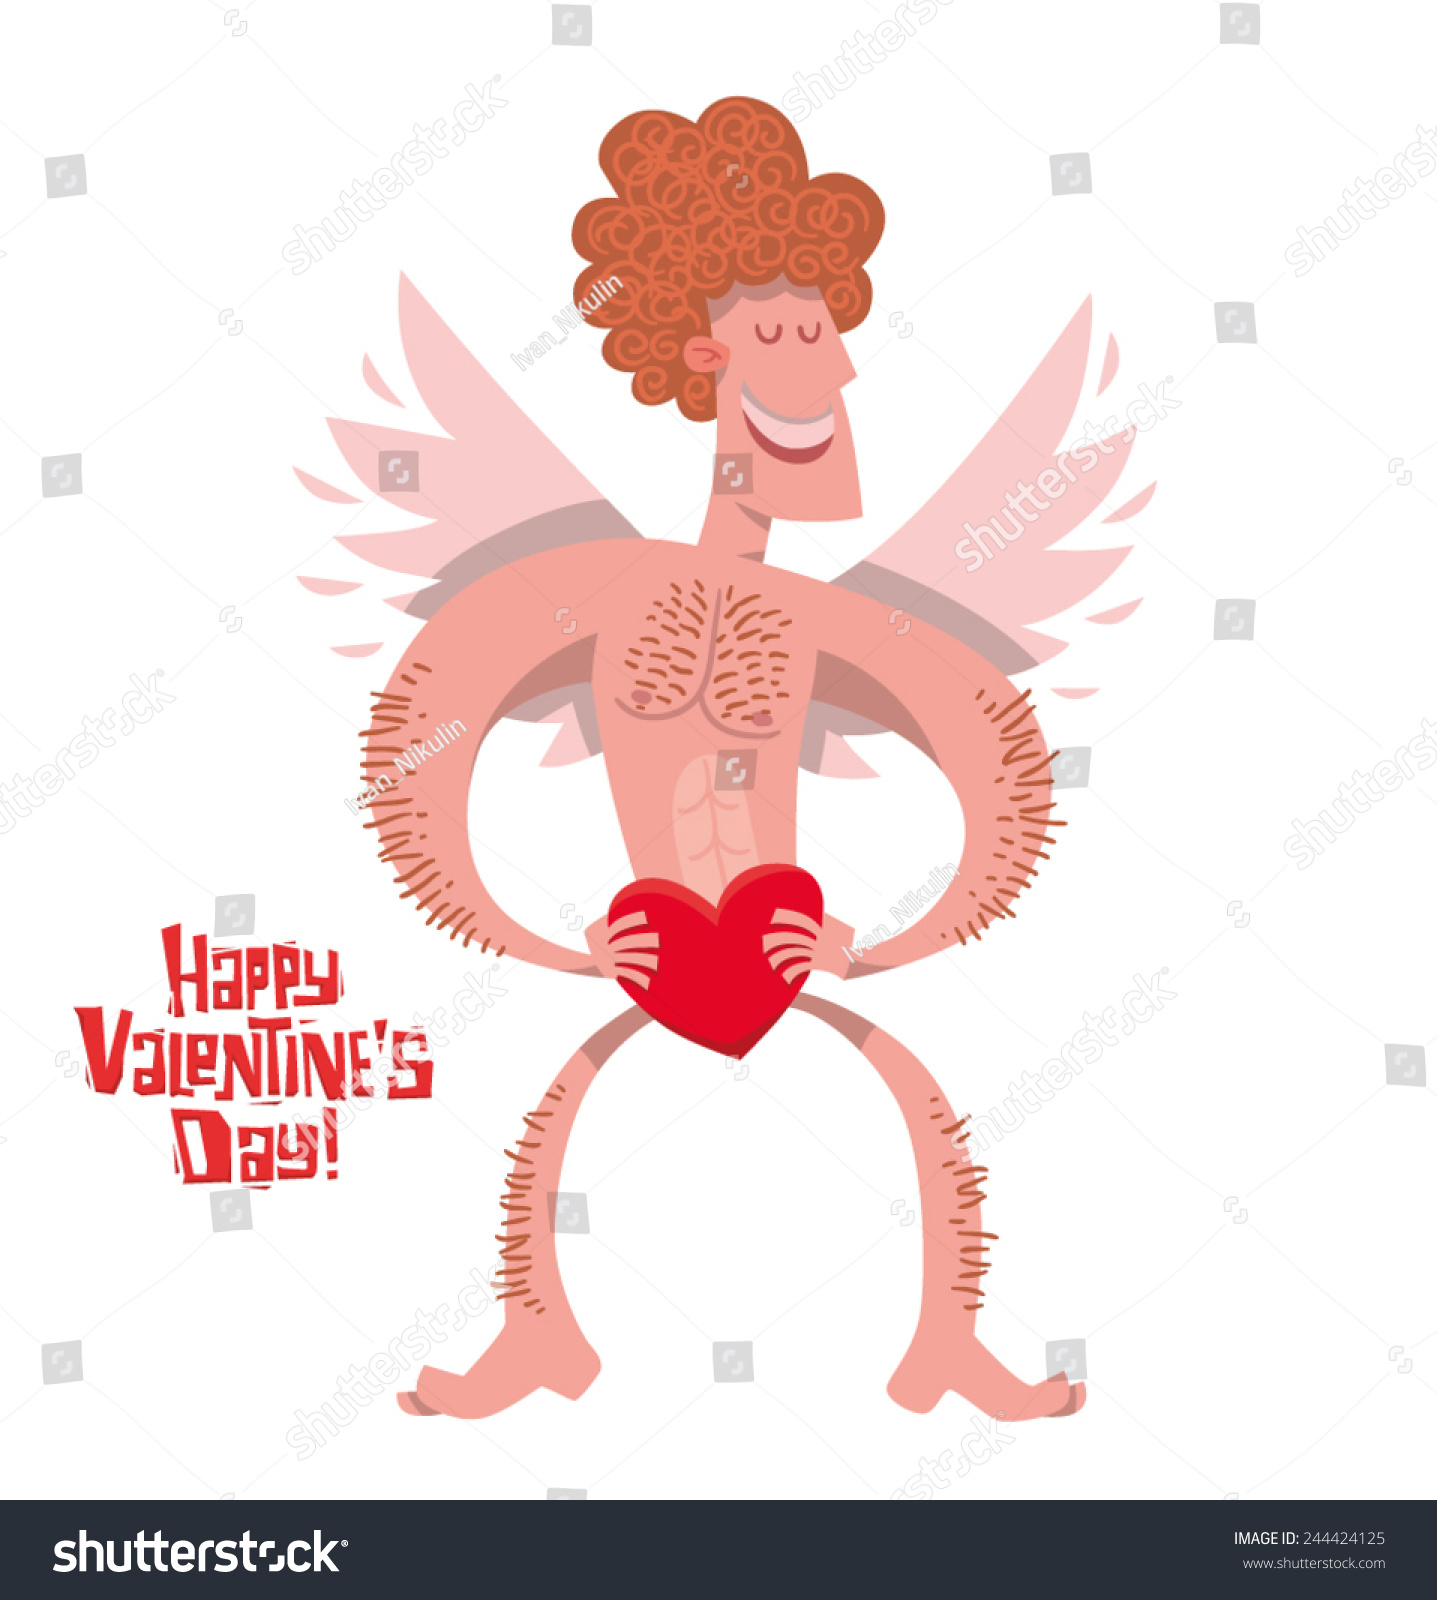 Sexy Male Cupid Vector Stock Vector (Royalty Free) 244424125 Shutterstock.